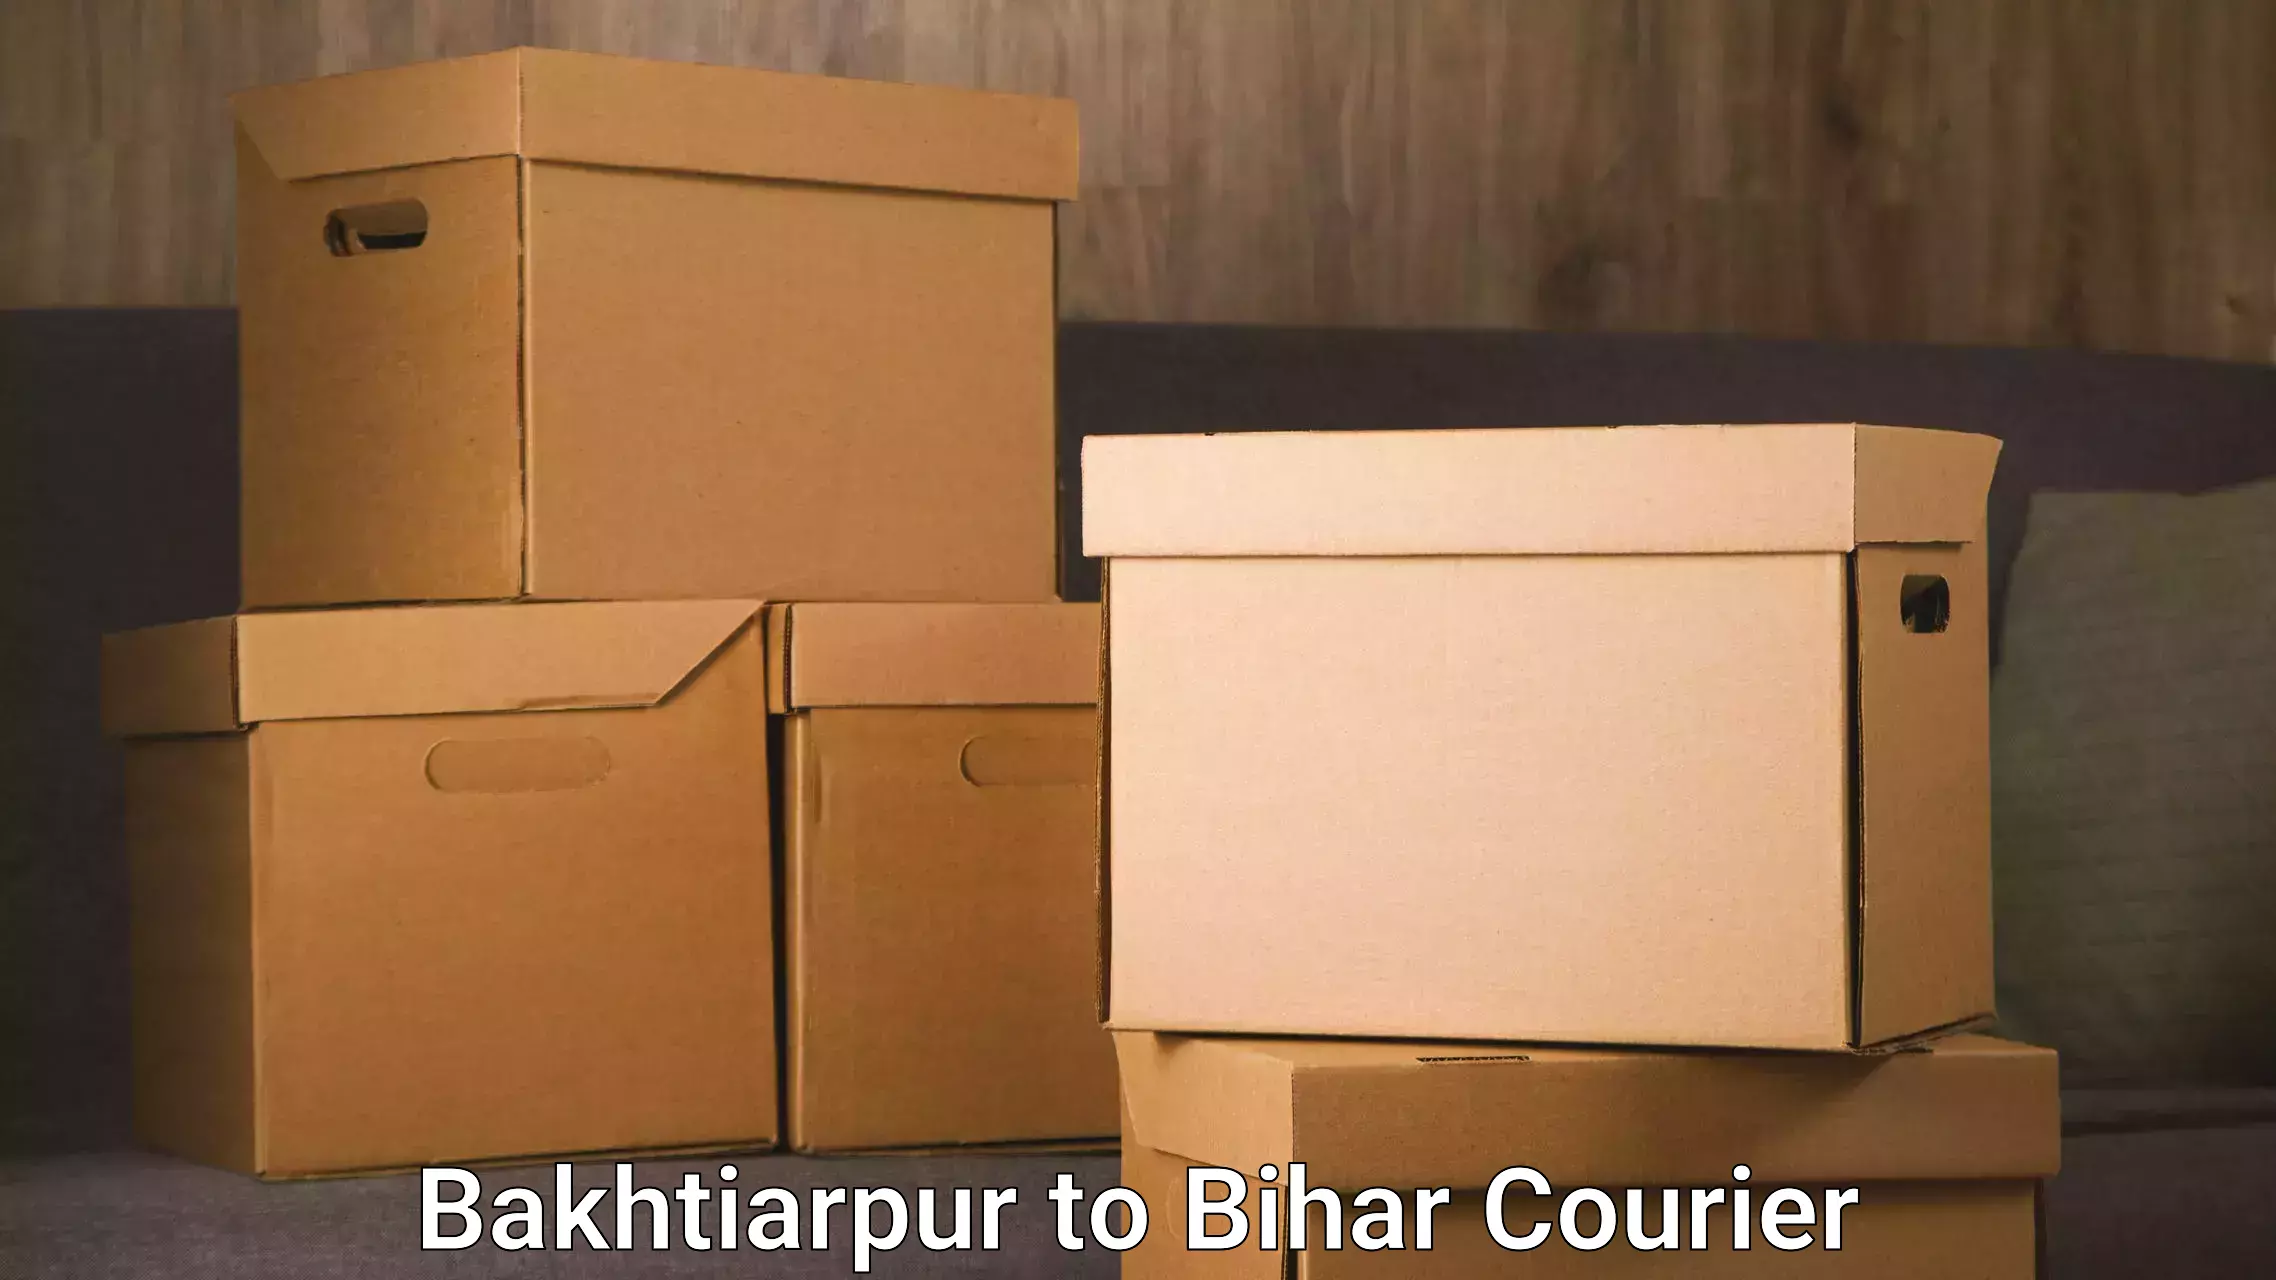 Moving and packing experts Bakhtiarpur to Bihar